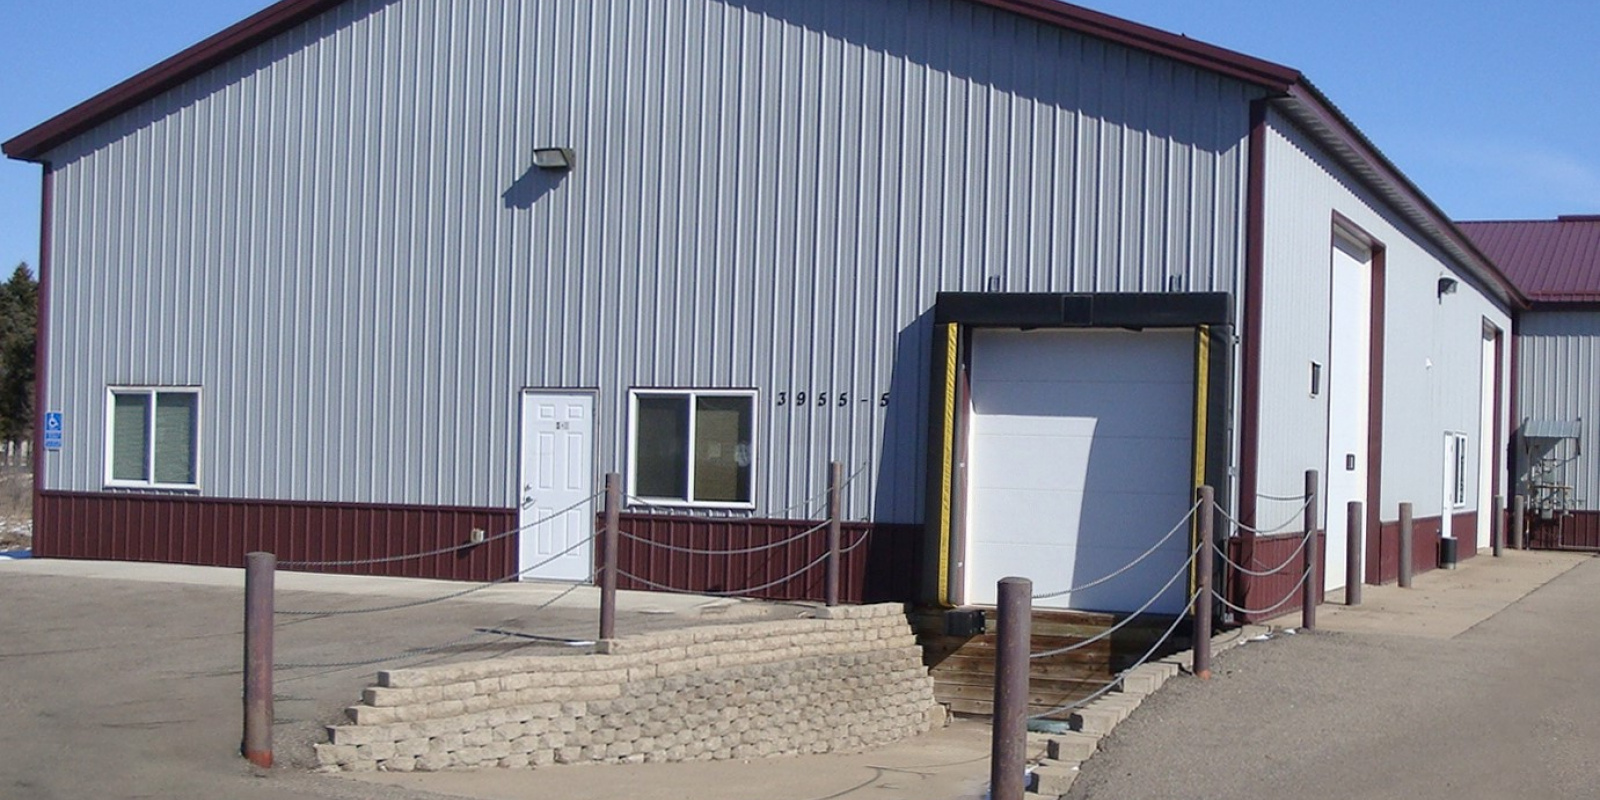 Industrial Warehouse for Lease in Sauk Rapids, MN. Contact Rice Real Estate Services for details. 